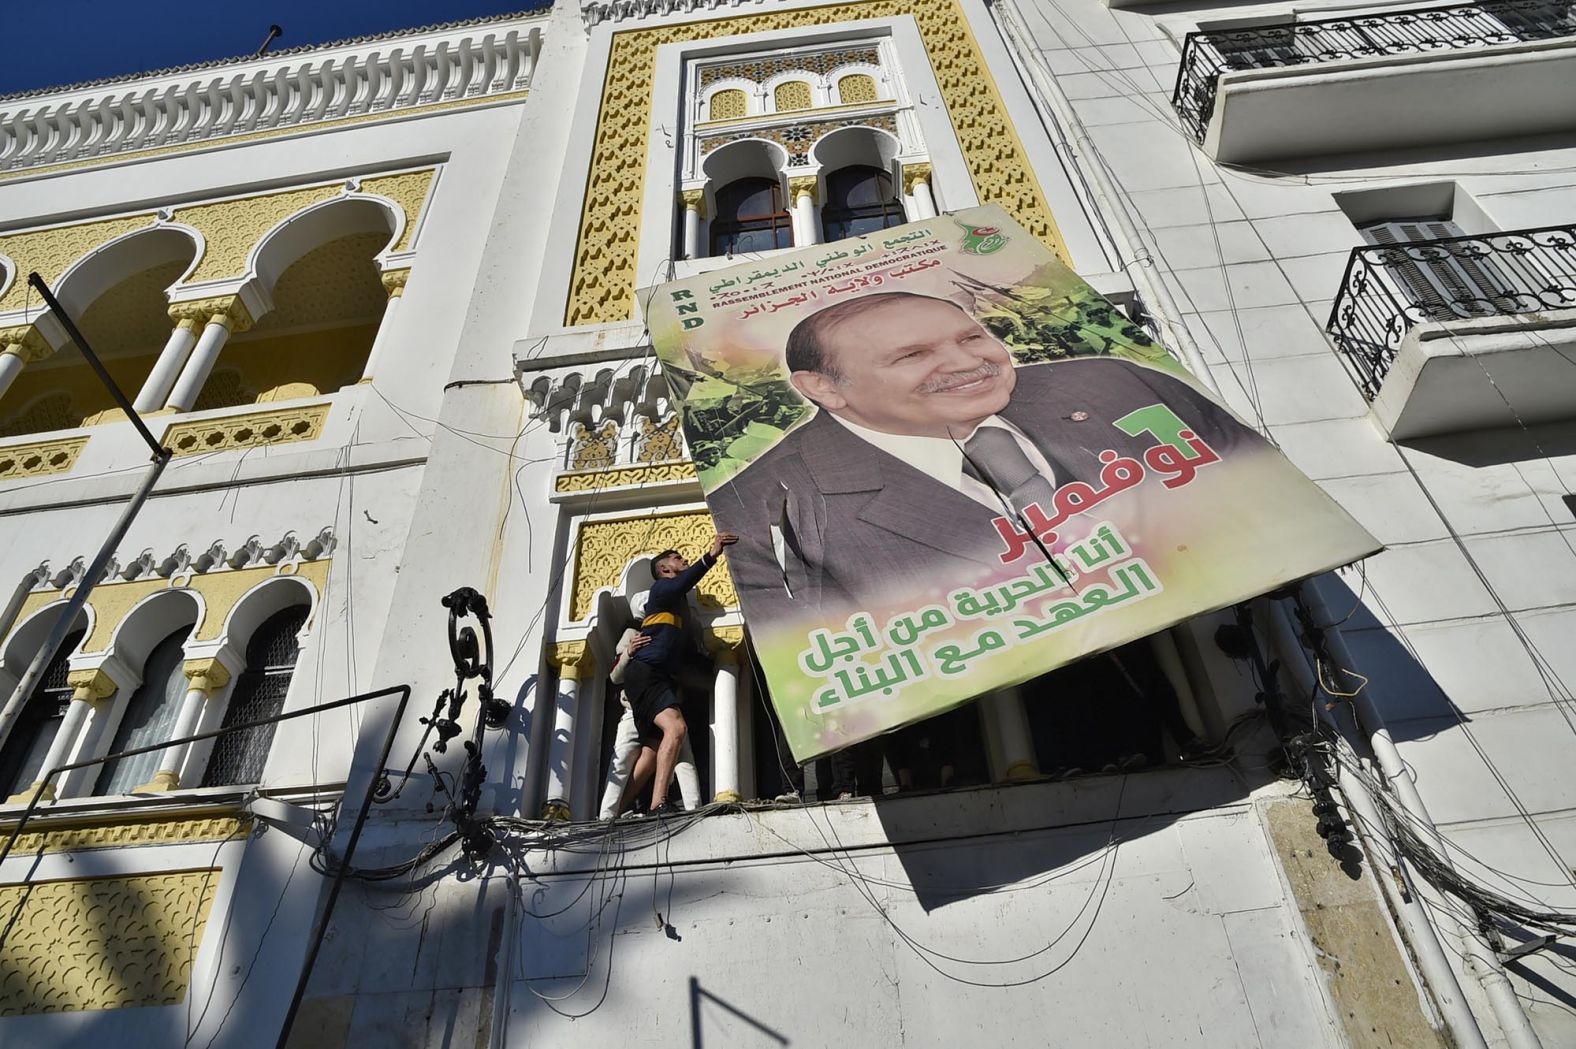 Demonstrators, protesting against Bouteflika's candidacy, tear down a large billboard of him in Algiers in February 2019.